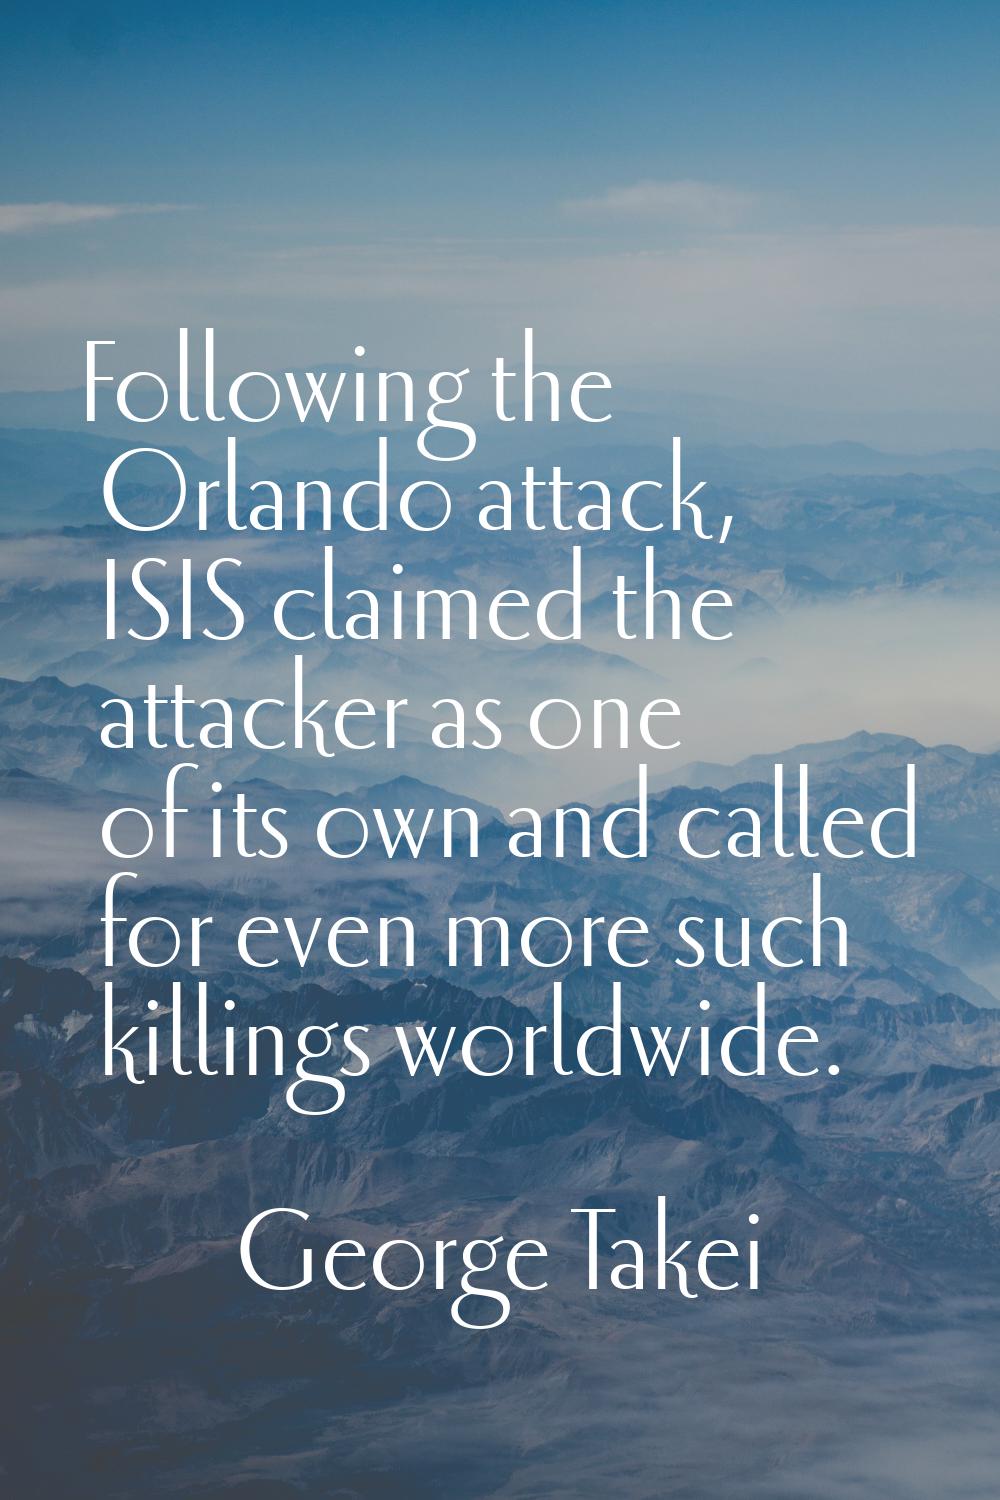 Following the Orlando attack, ISIS claimed the attacker as one of its own and called for even more 